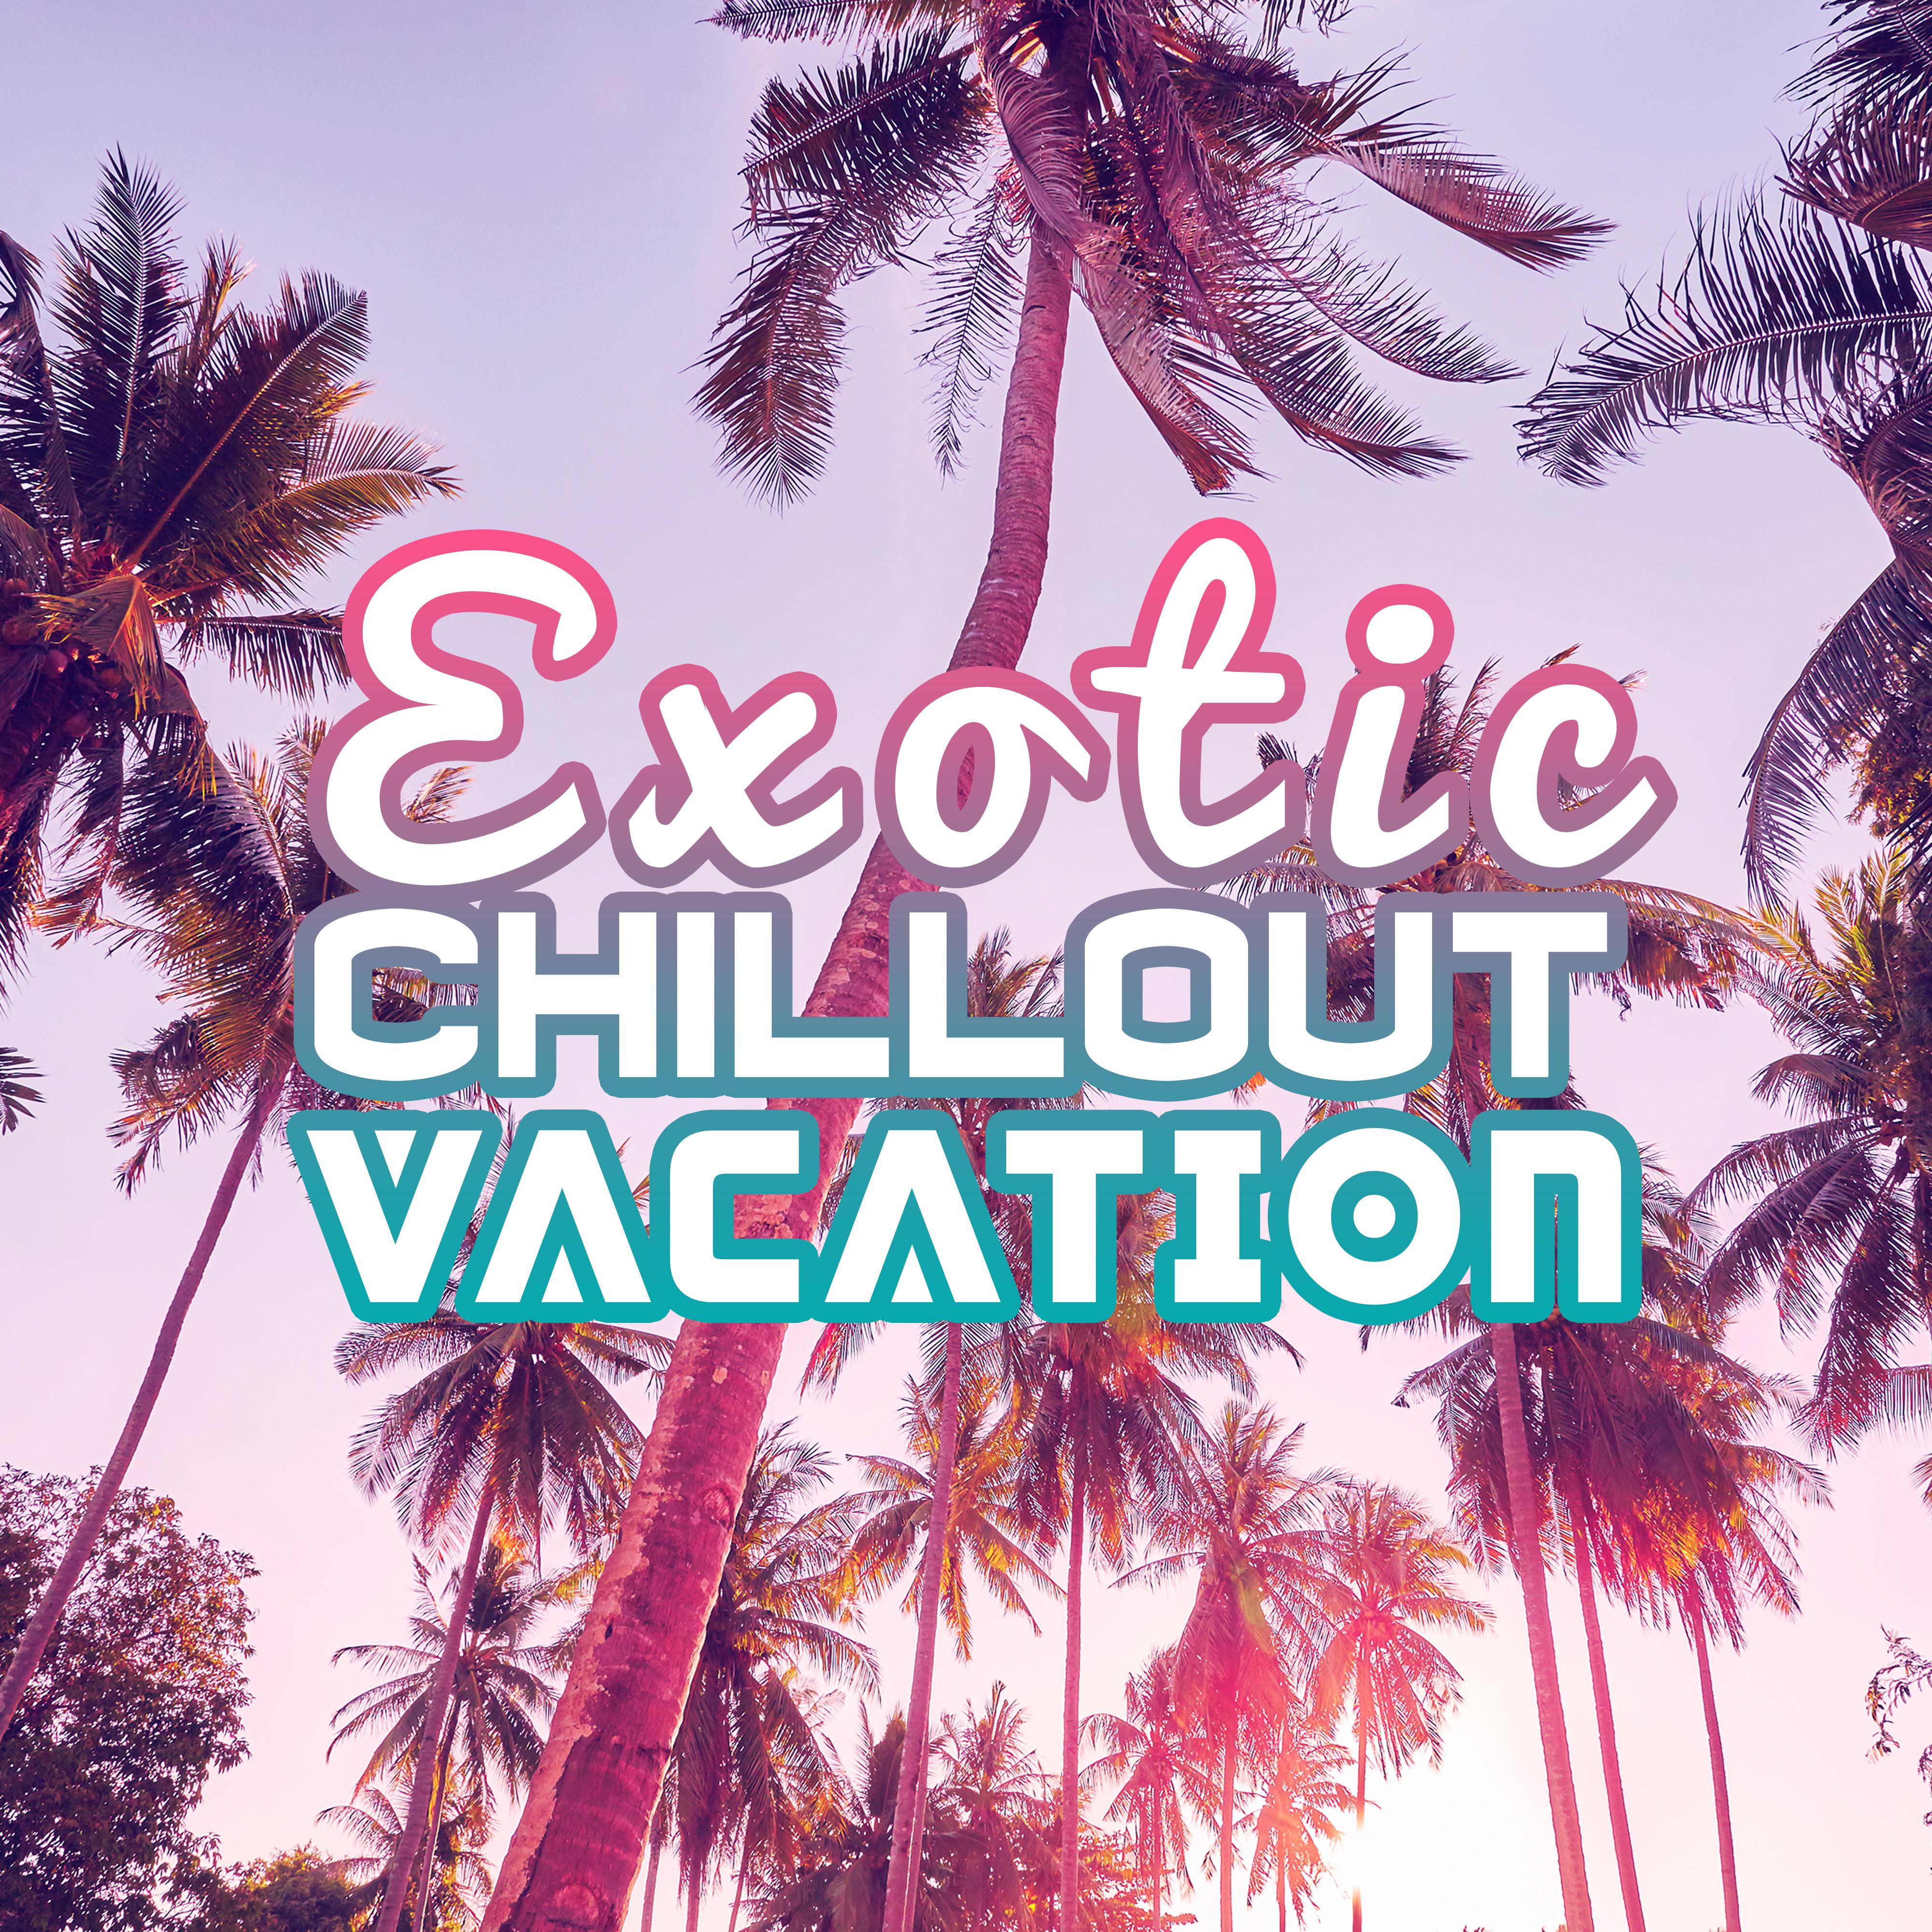 Exotic Chillout Vacation  Sun  Sand Music Compilation, Summer Rest  Relax